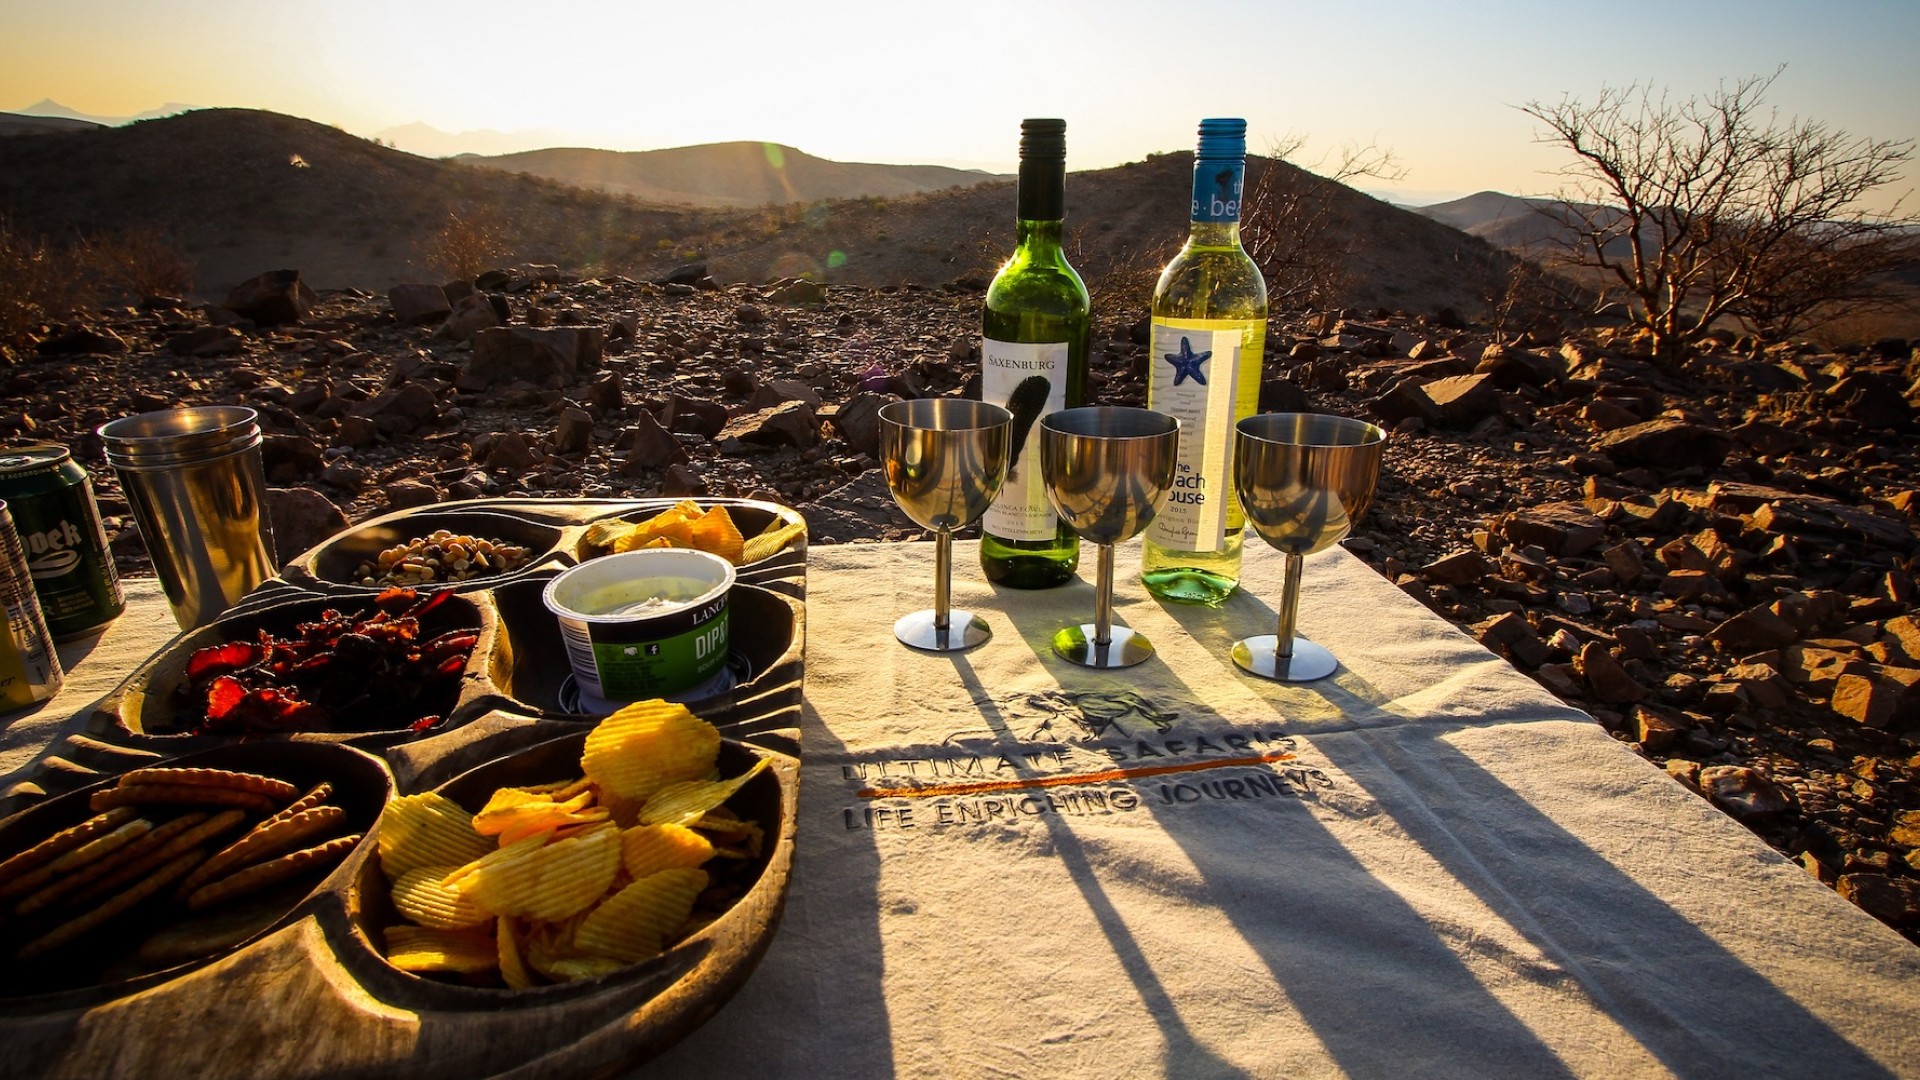 A table with three wine glasses, two bottles of wine, and a spread of chips and other light appetizers with the sunsetting behind it